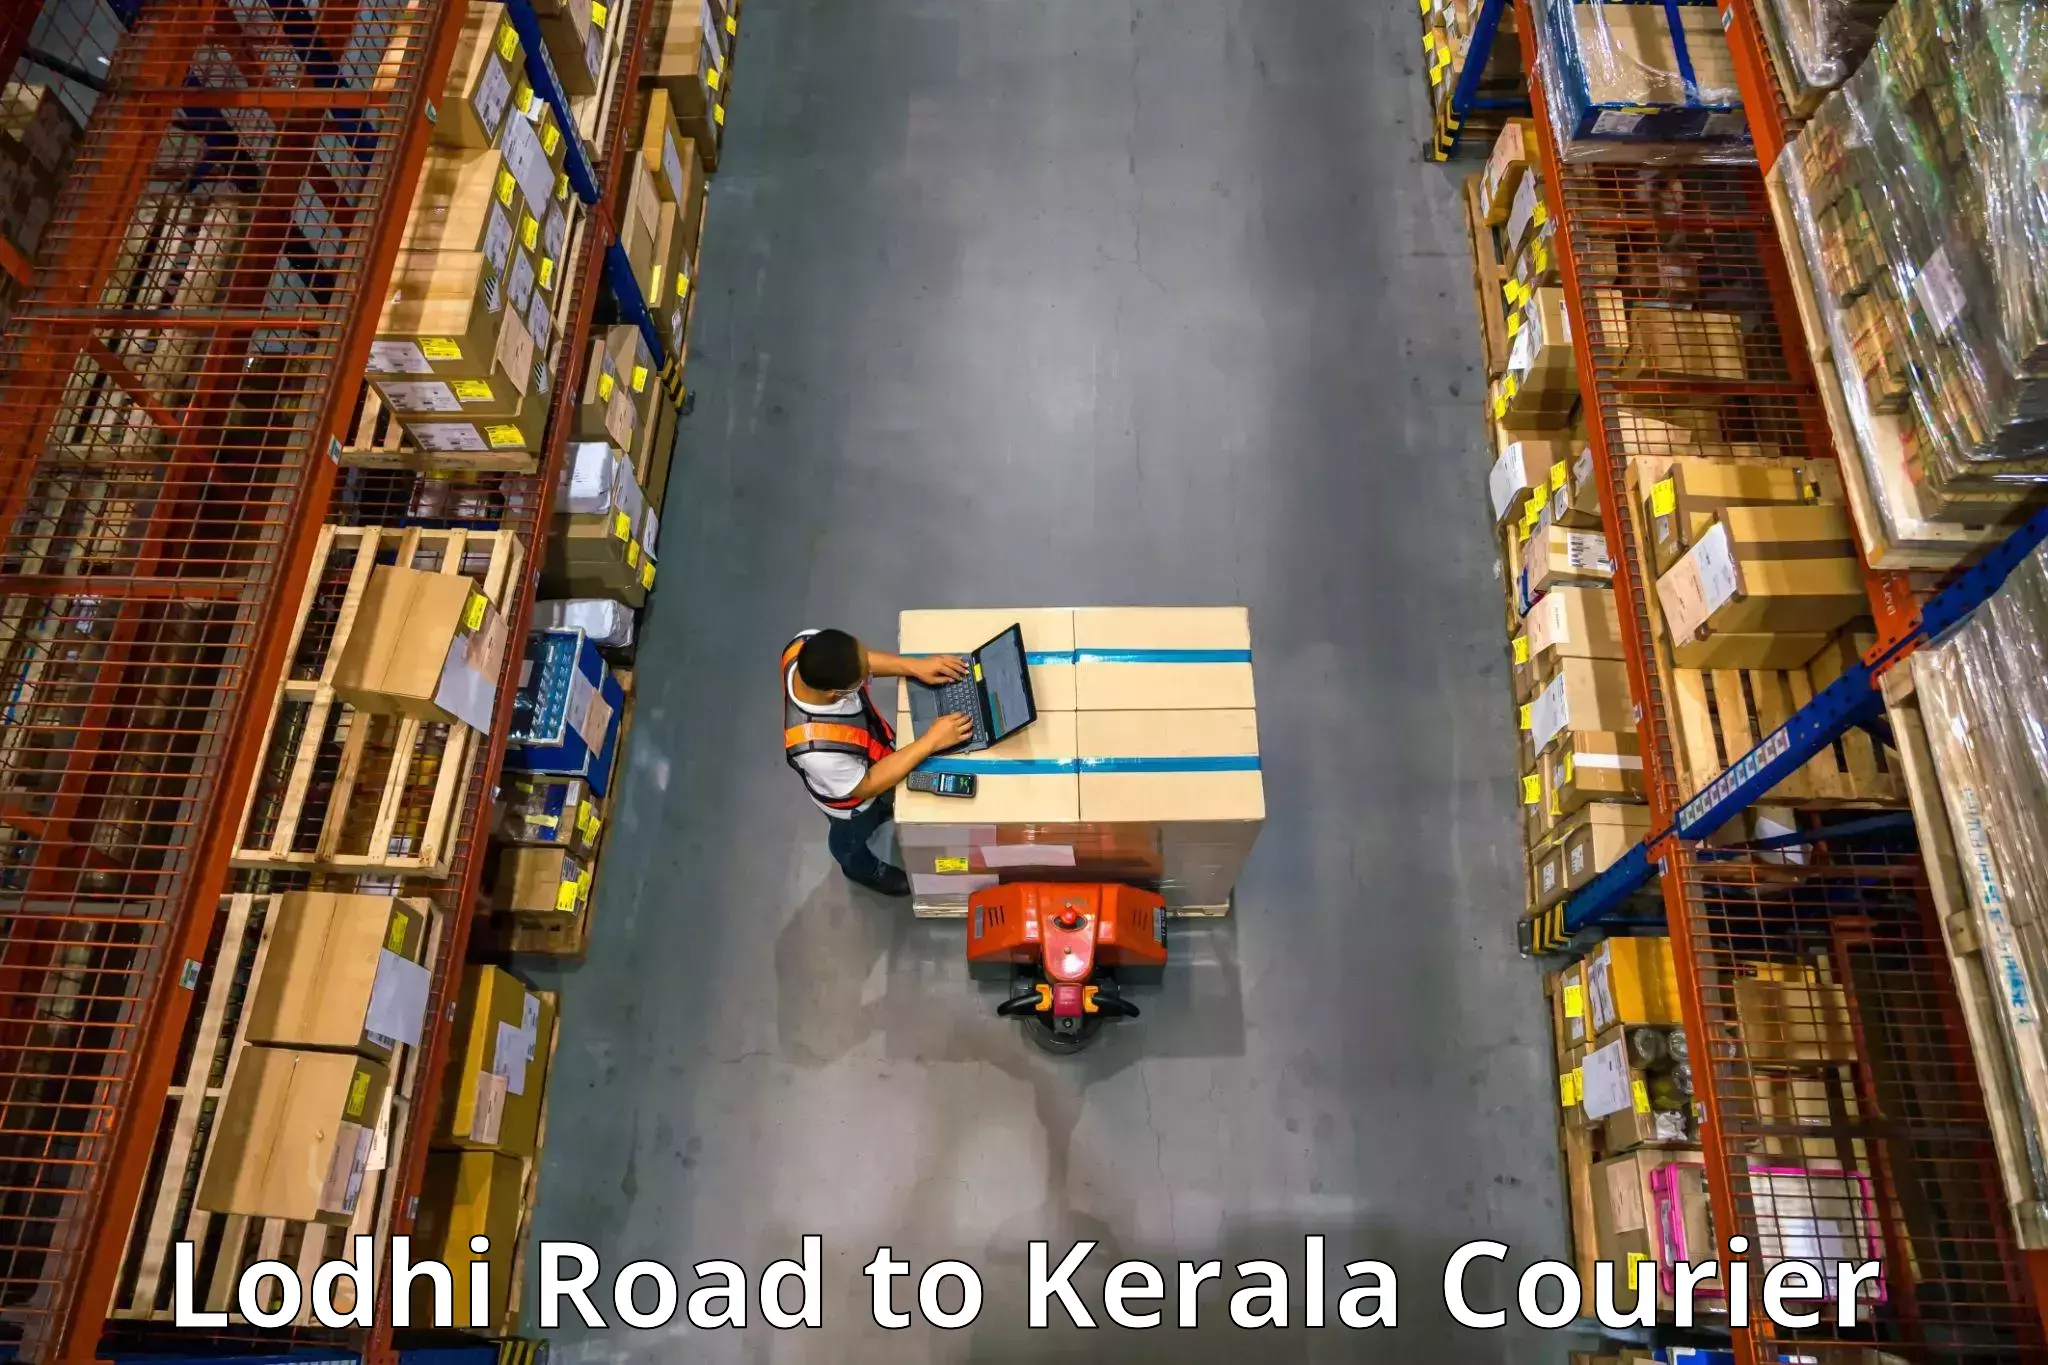 Quality relocation services Lodhi Road to Kattappana